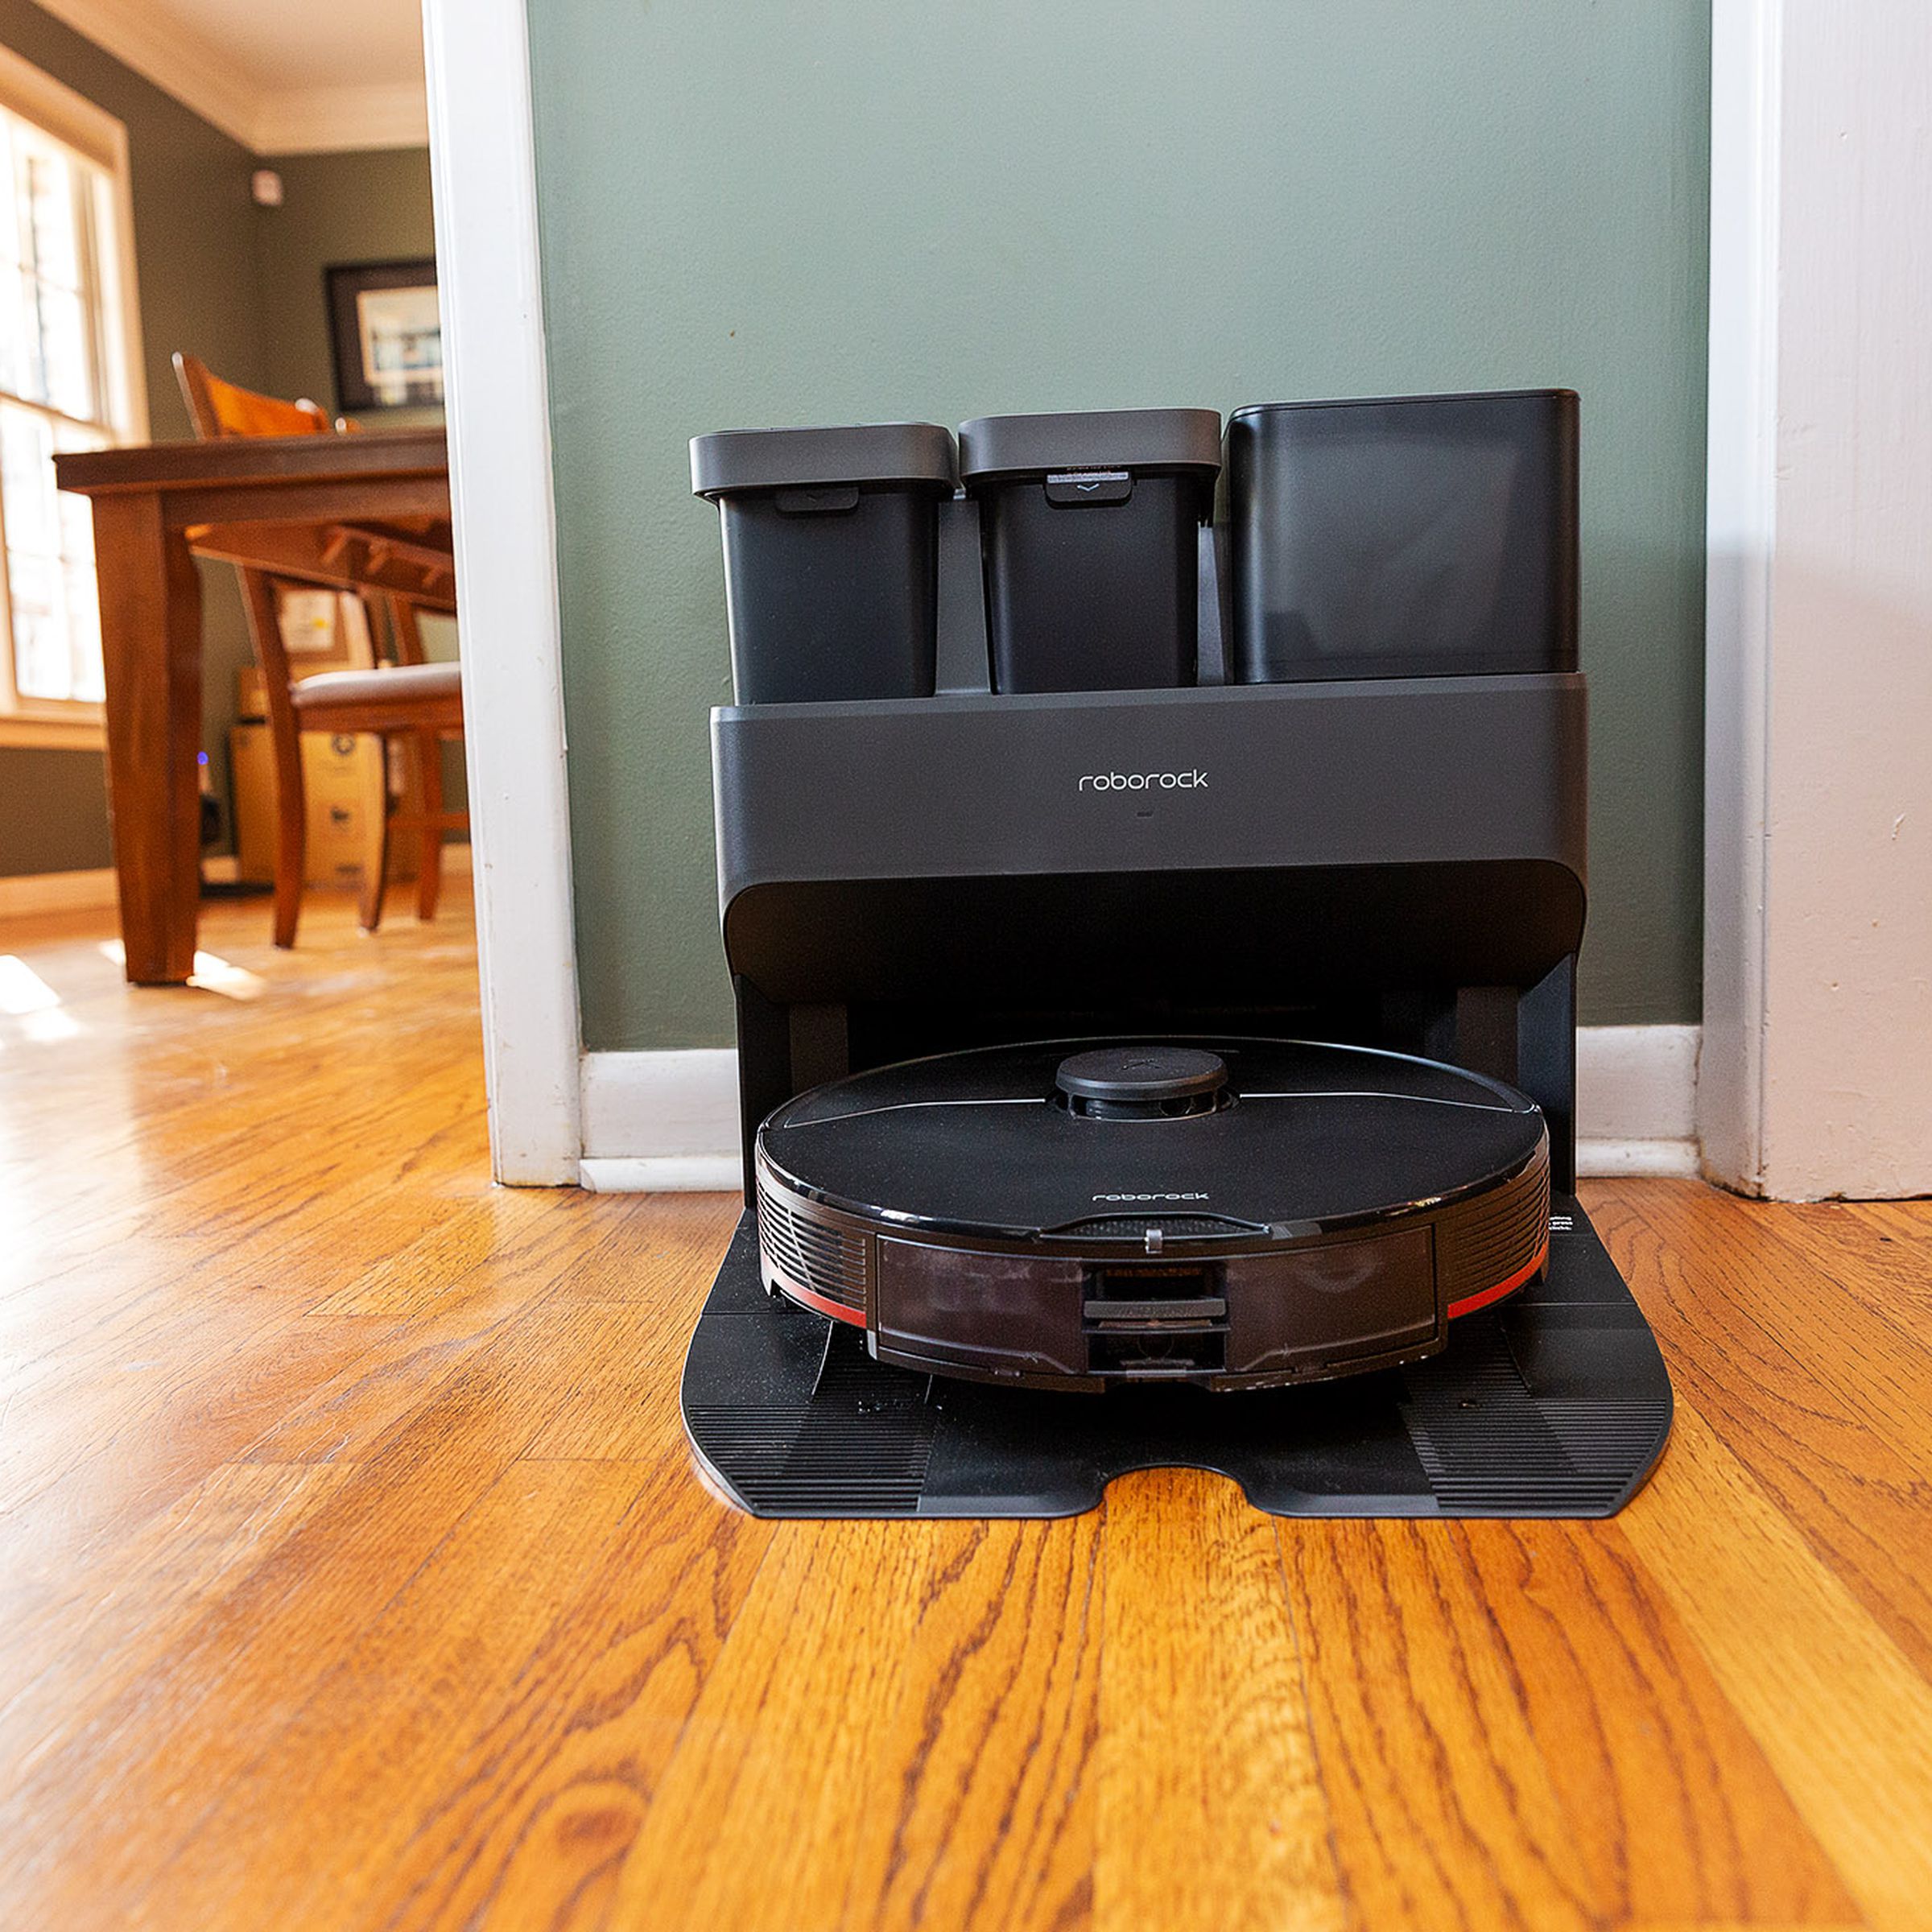 A robot vacuum and its docking station in a living room.